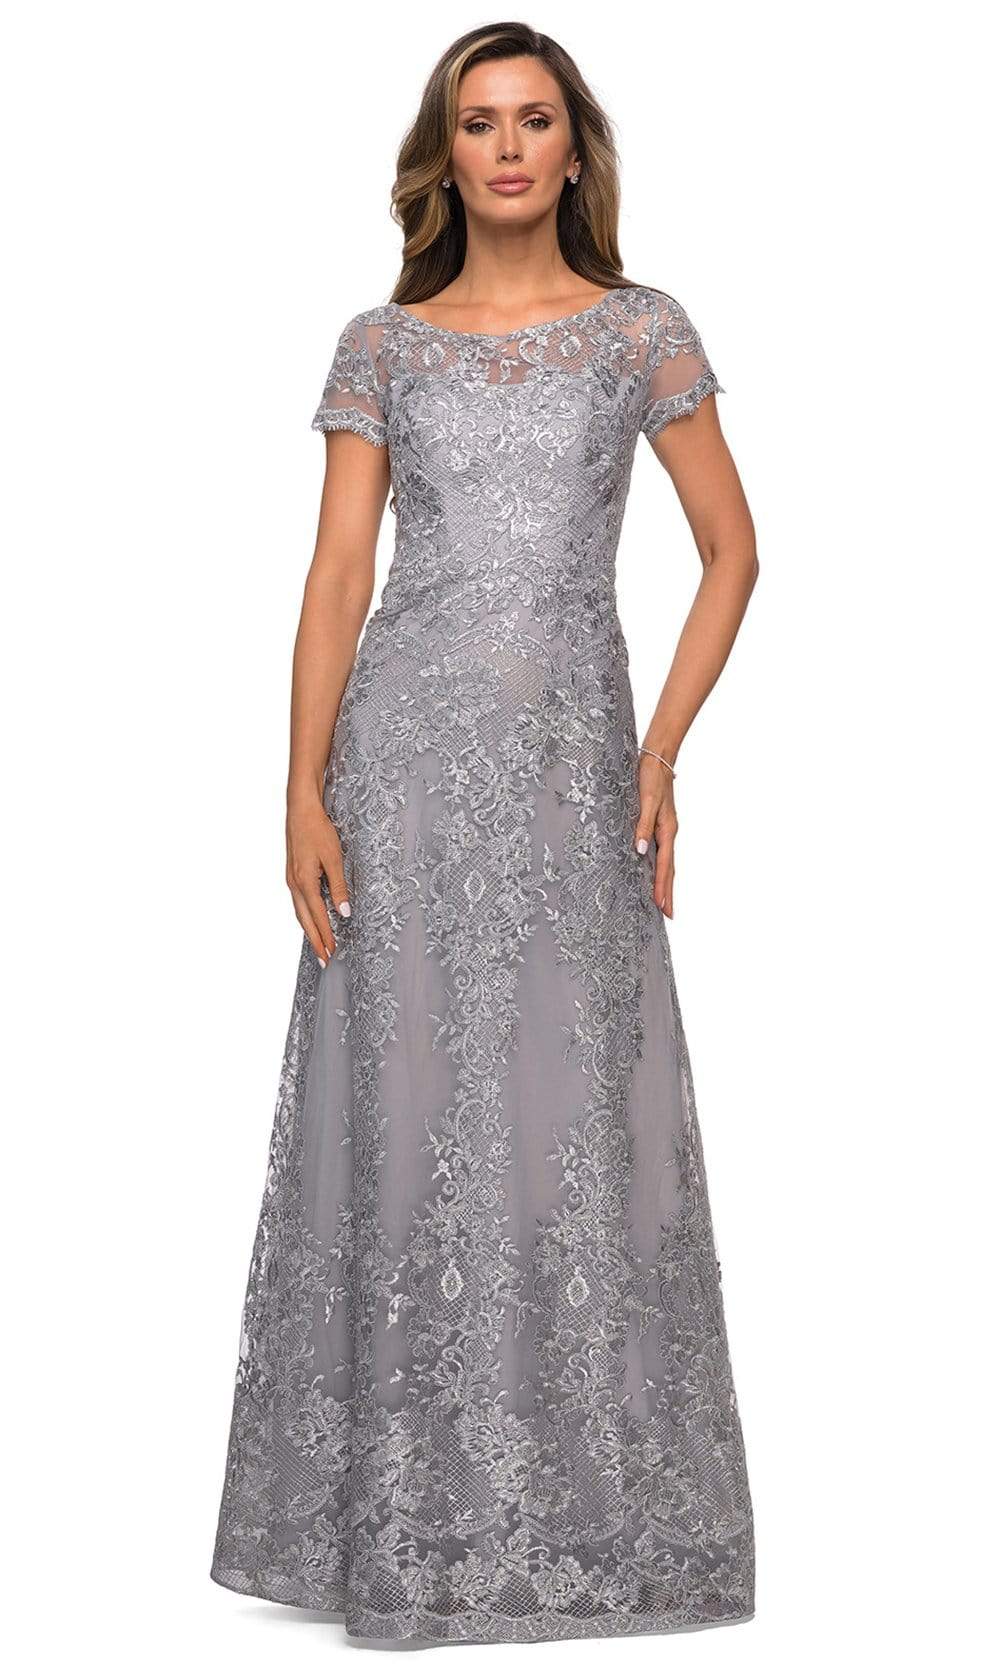 La Femme - 27935 Illusion Neckline Beaded Lace Ornate A-Line Gown Mother of the Bride Dresses 2 / Silver